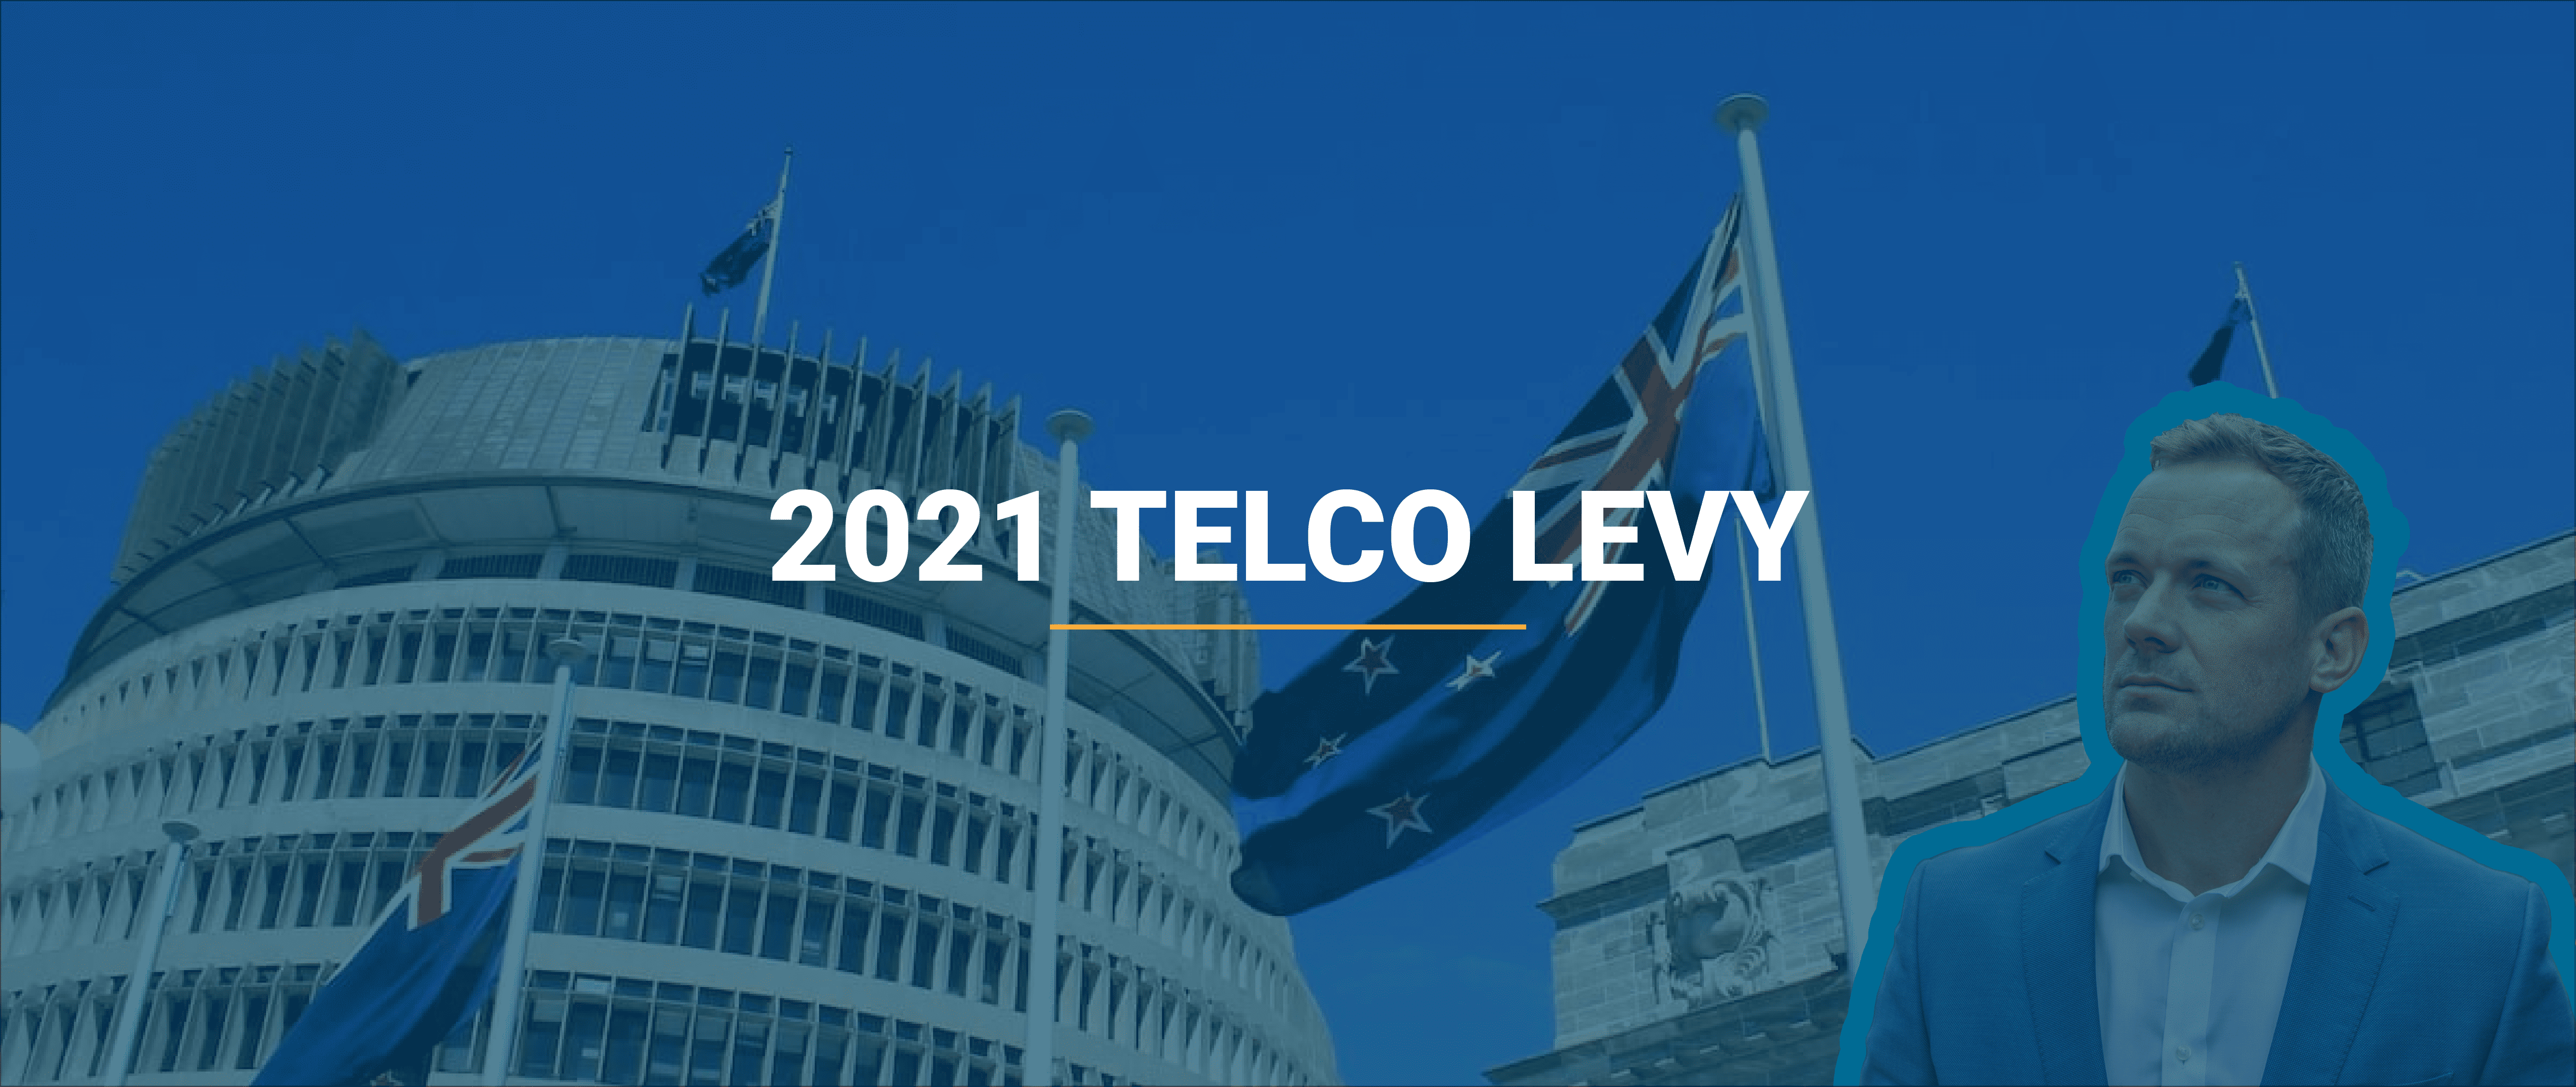 blog cover - 2021 TELCO LEVY-01